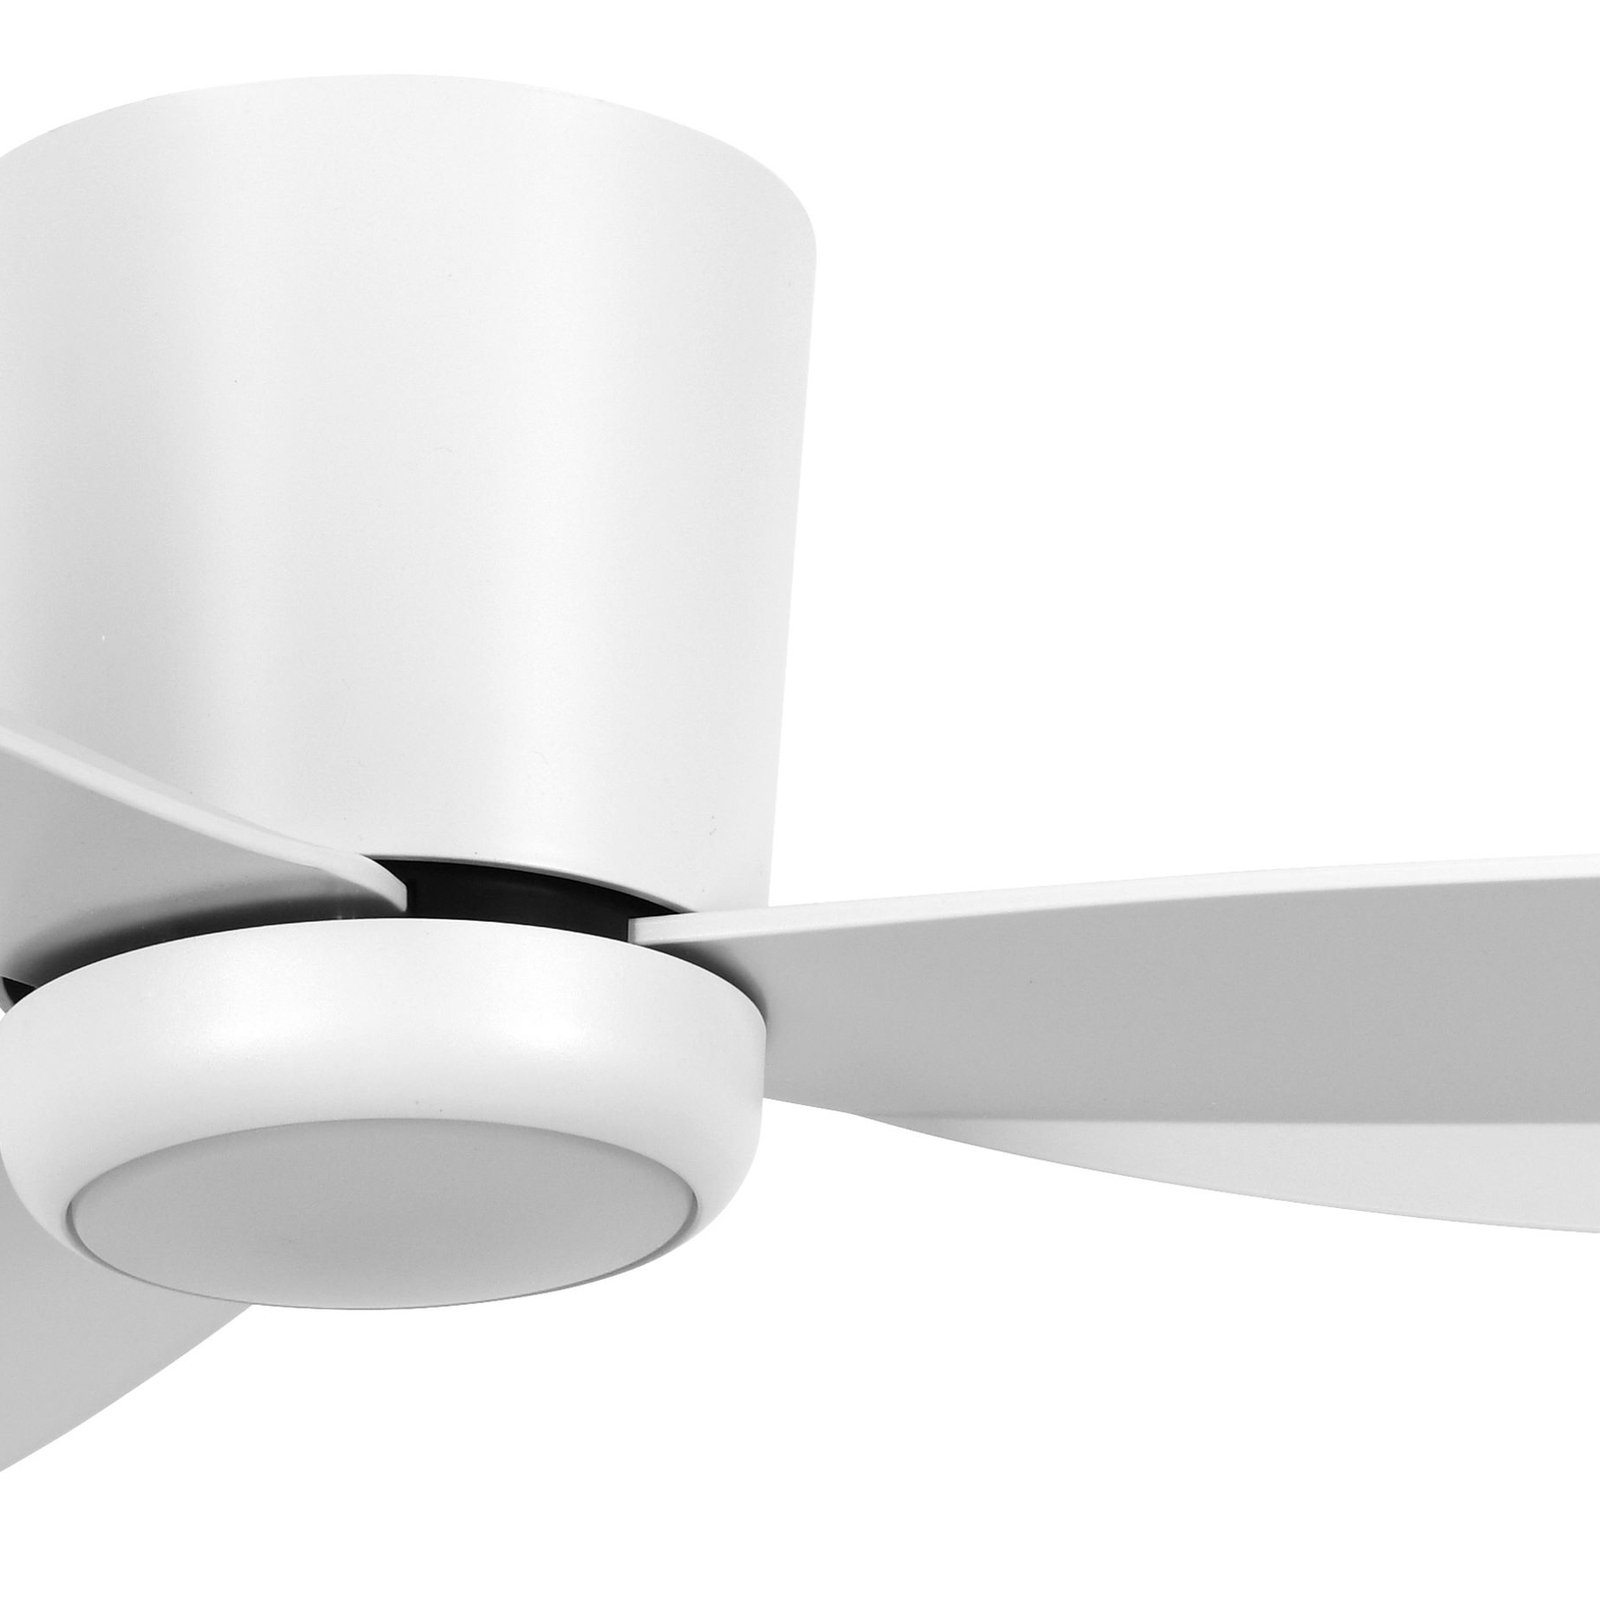 Beacon ceiling fan with light Array white 137 cm quiet